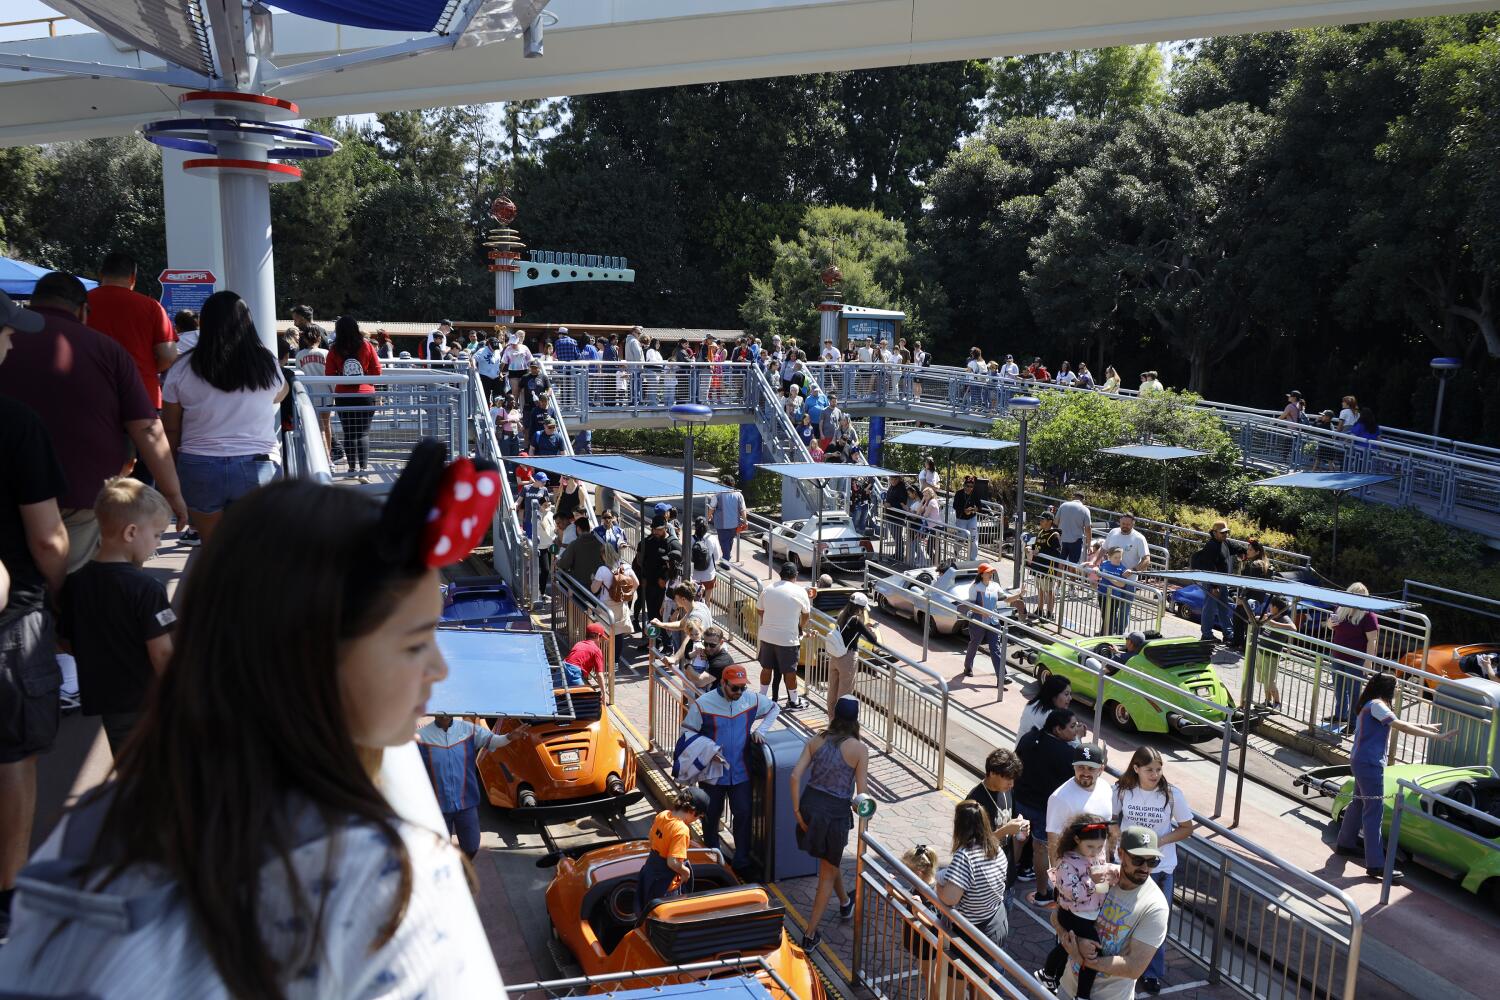 Column: Disneyland just promised electric cars at Autopia by 2026